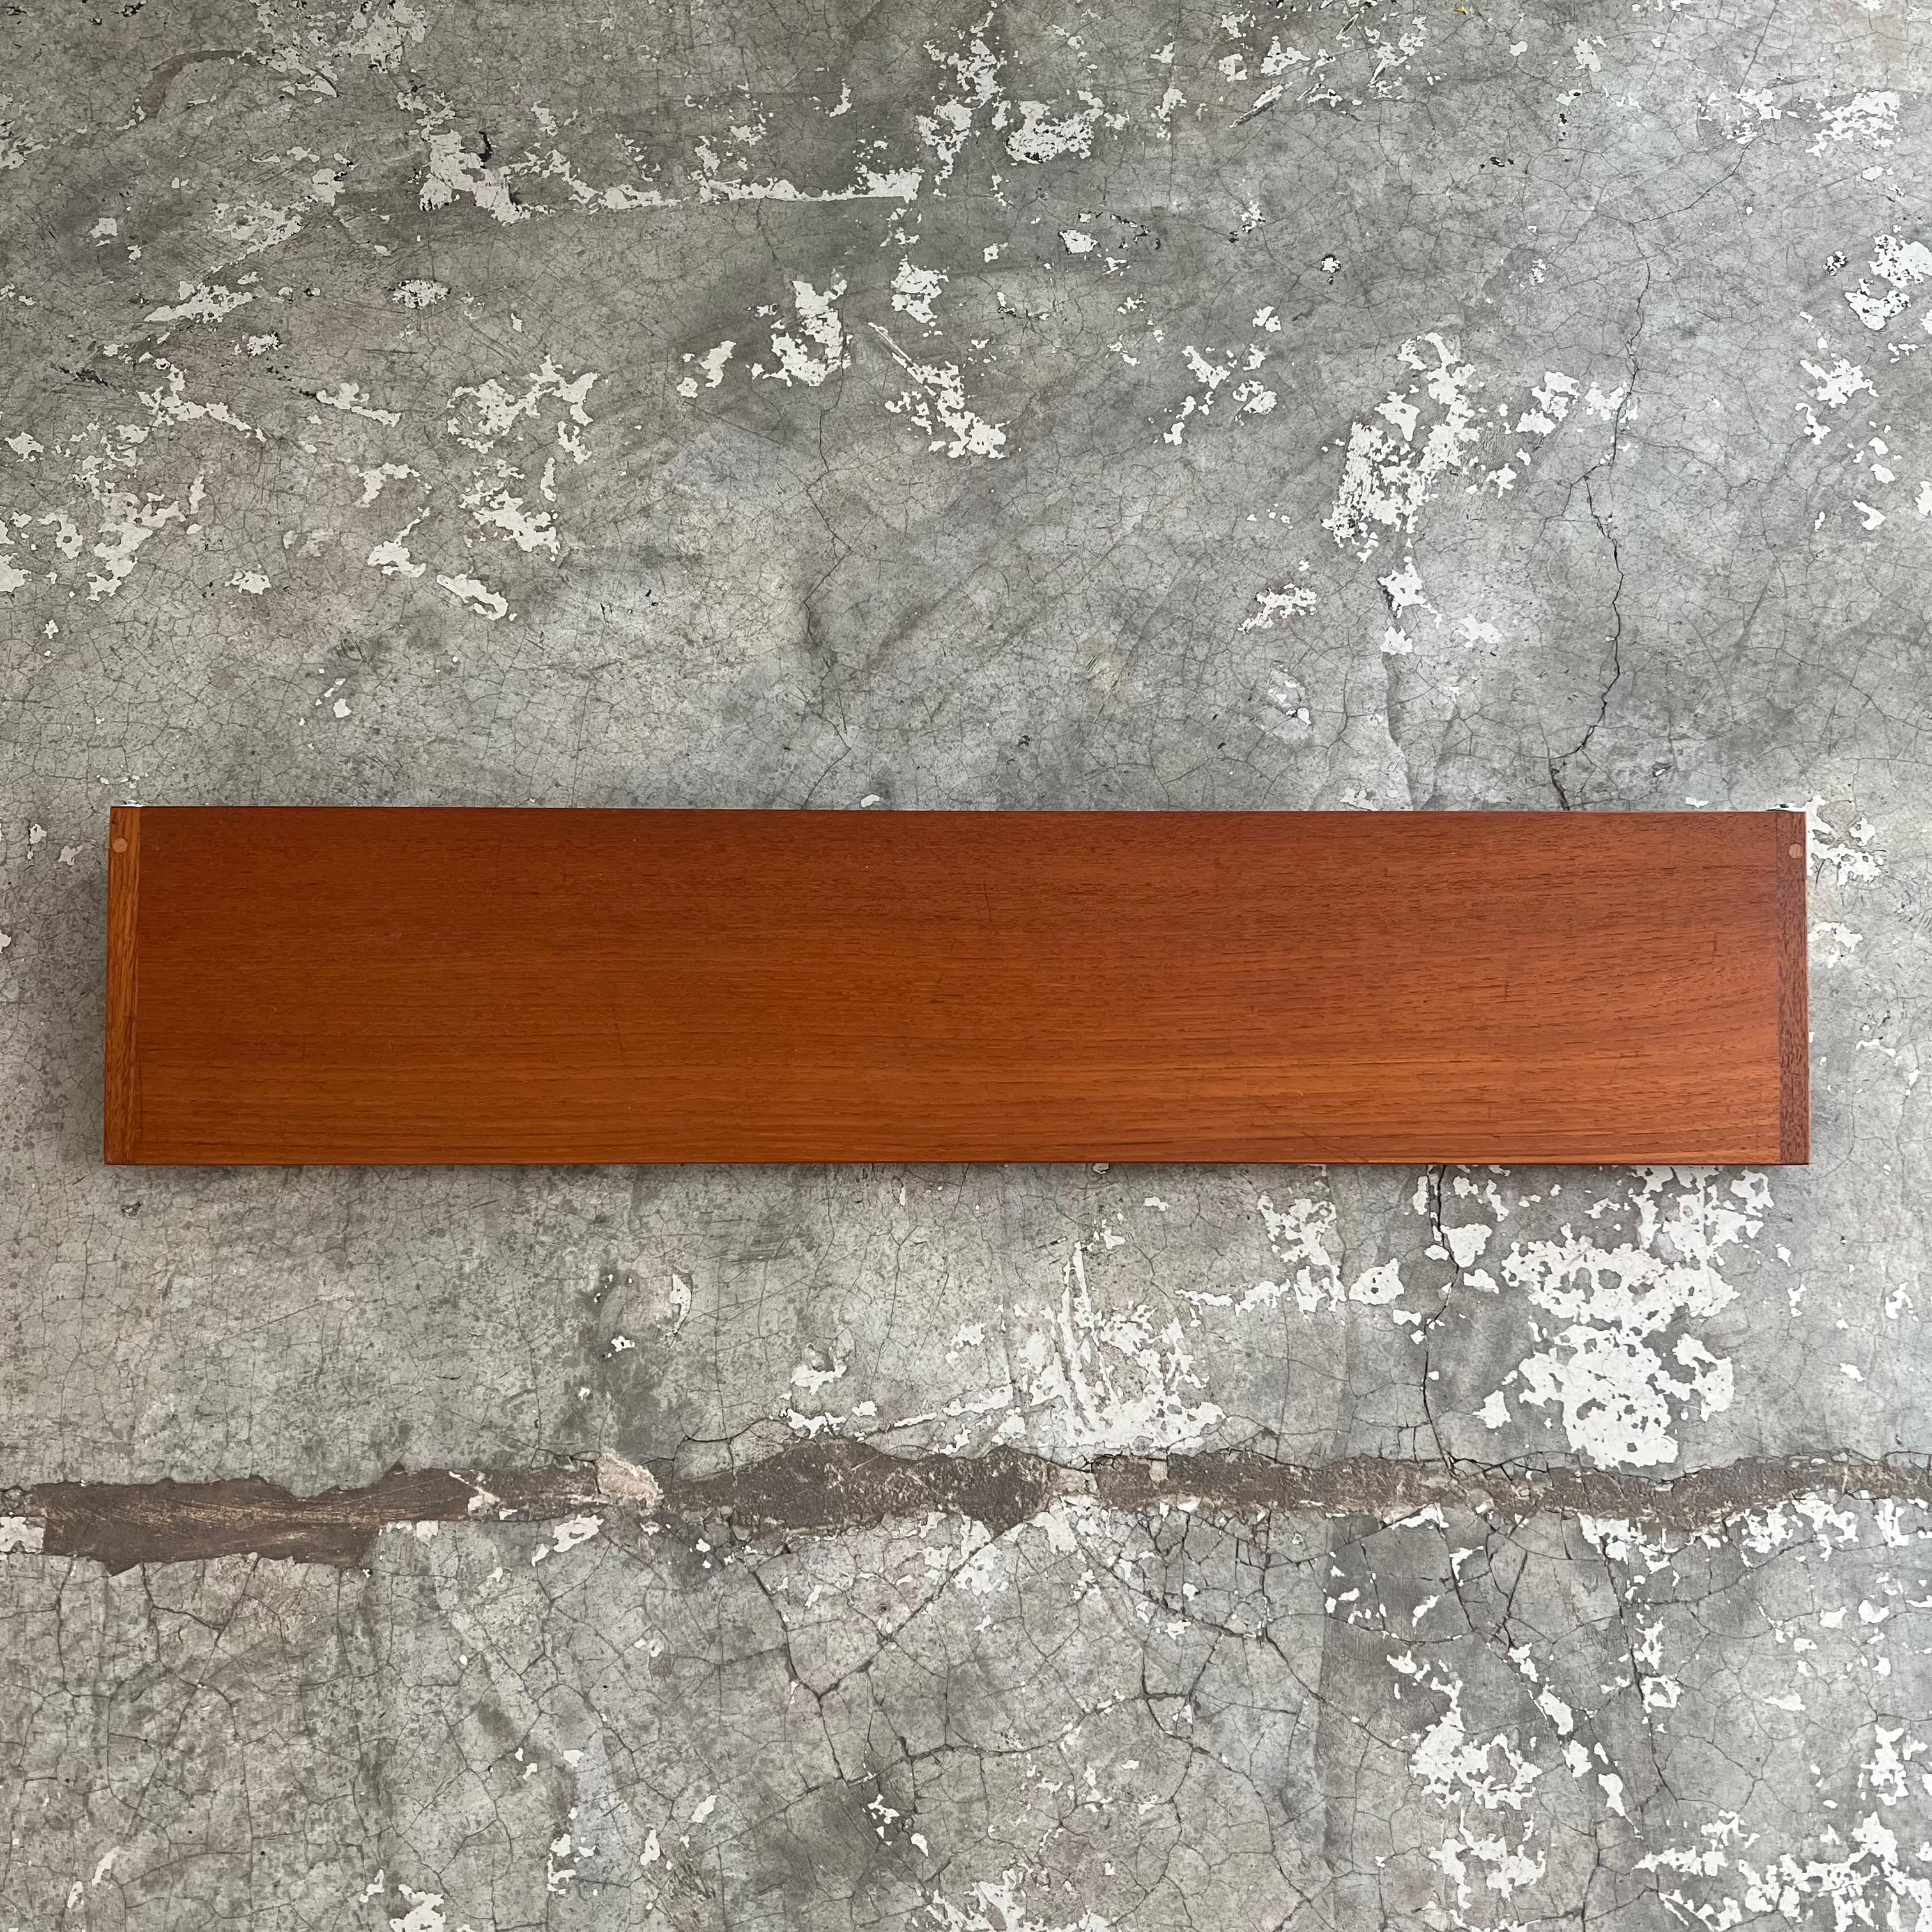 This shelf was designed by Kai Kristiansen for the Danish publisher Feldalles Møbler in the 1960s. This designer is a major figure in 20th century Scandinavian design. He is known for his modular shelving. The structure of these shelves is in teak,